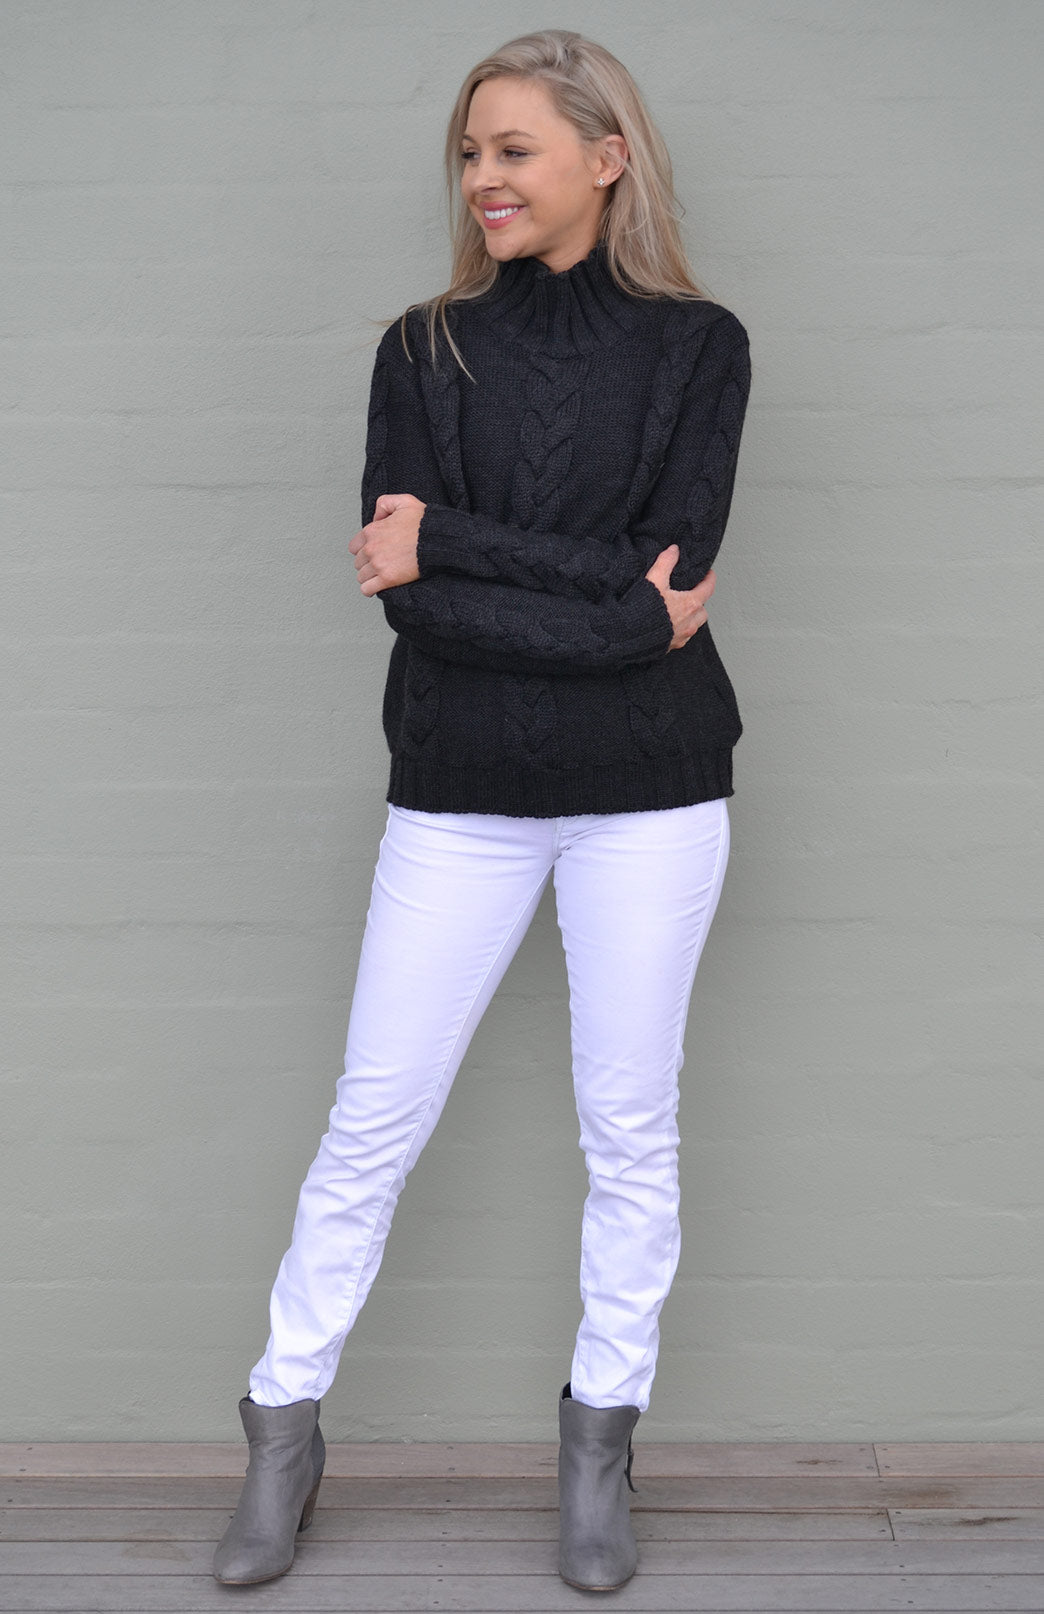 Women's Dropped Shoulder Cable Crew Jumper in Charcoal Grit